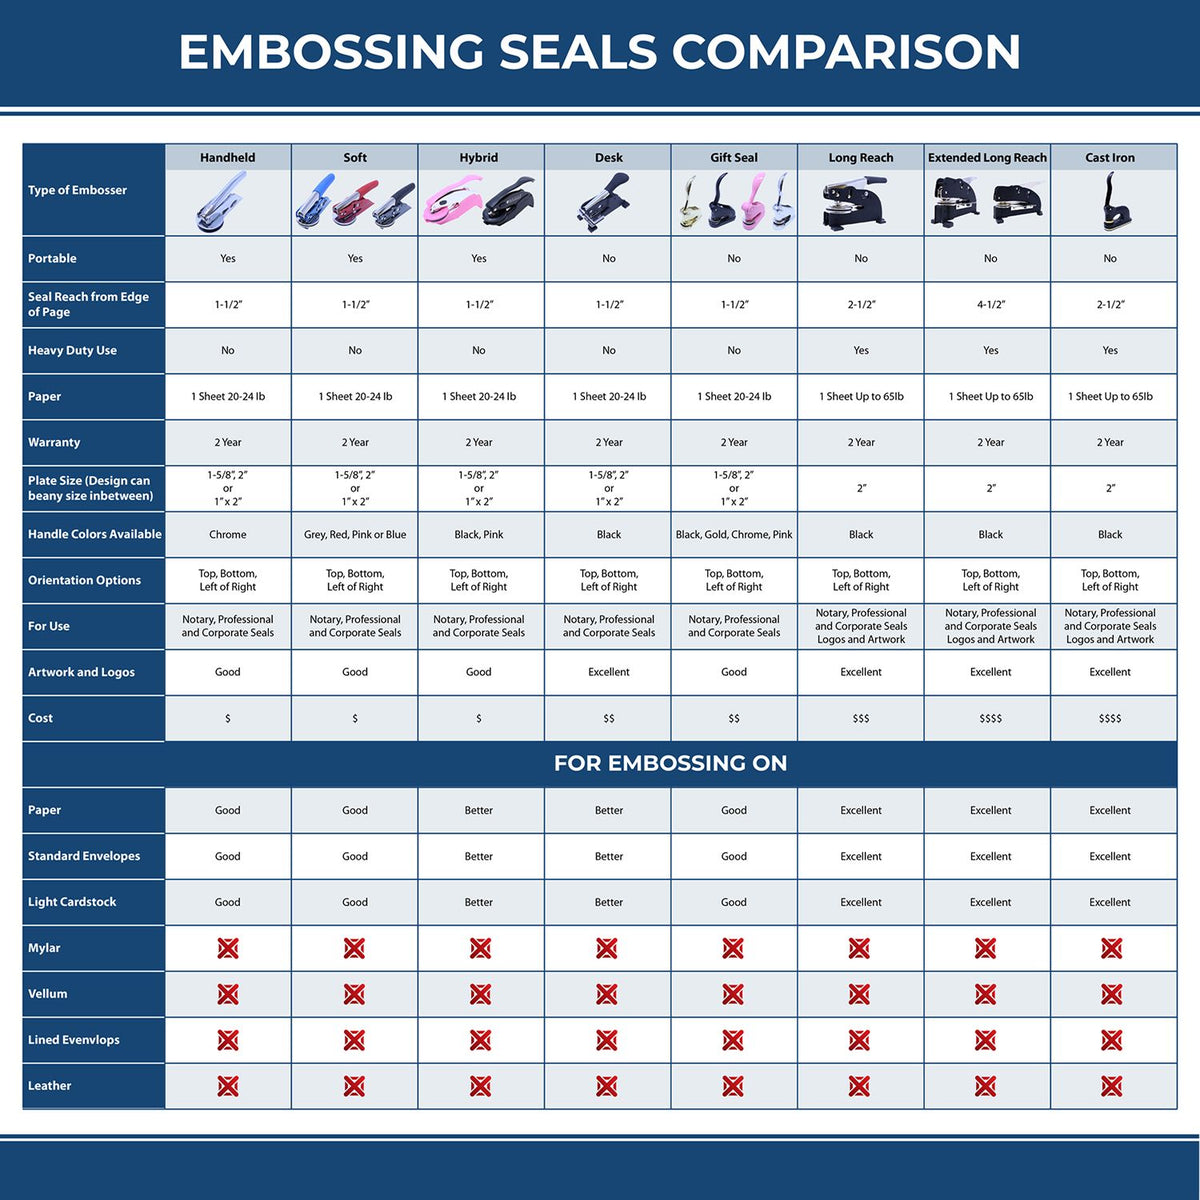 A comparison chart for the different types of mount models available for the State of Mississippi Extended Long Reach Geologist Seal